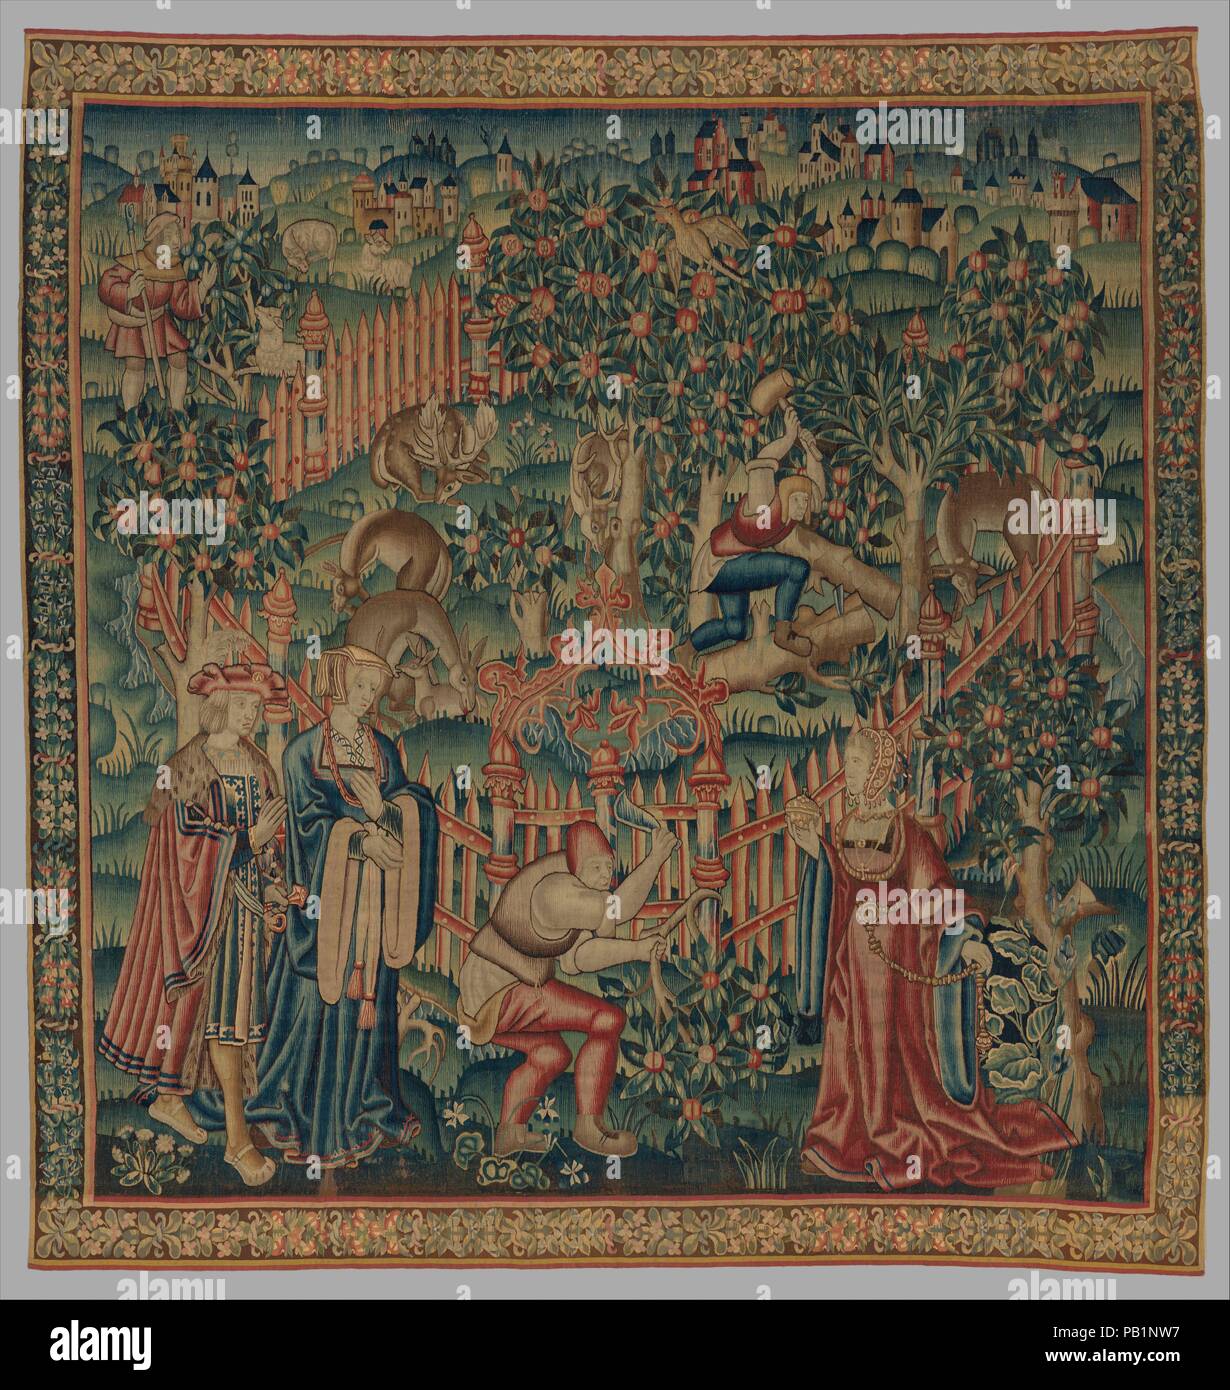 Woodcutters Working at a Deer Park (from the Hunting Parks Tapestries). Culture: South Netherlandish. Dimensions: Overall: 134 1/2 x 126 1/2in. (341.6 x 321.3cm). Date: ca. 1515-35.  In this tapestry, one from a set of four, woodsmen work in and around a hunting park filled with deer. Inside the enclosure, one woodsman stands upon a tree trunk, splitting it with a wedge and mallet. Deer nestle nearby, oblivious to his presence. Outside, near the gate, another woodsman prunes a branch while three noble figures hover nearby. The fine garments and jeweled accessories of the nobles distinguish the Stock Photo